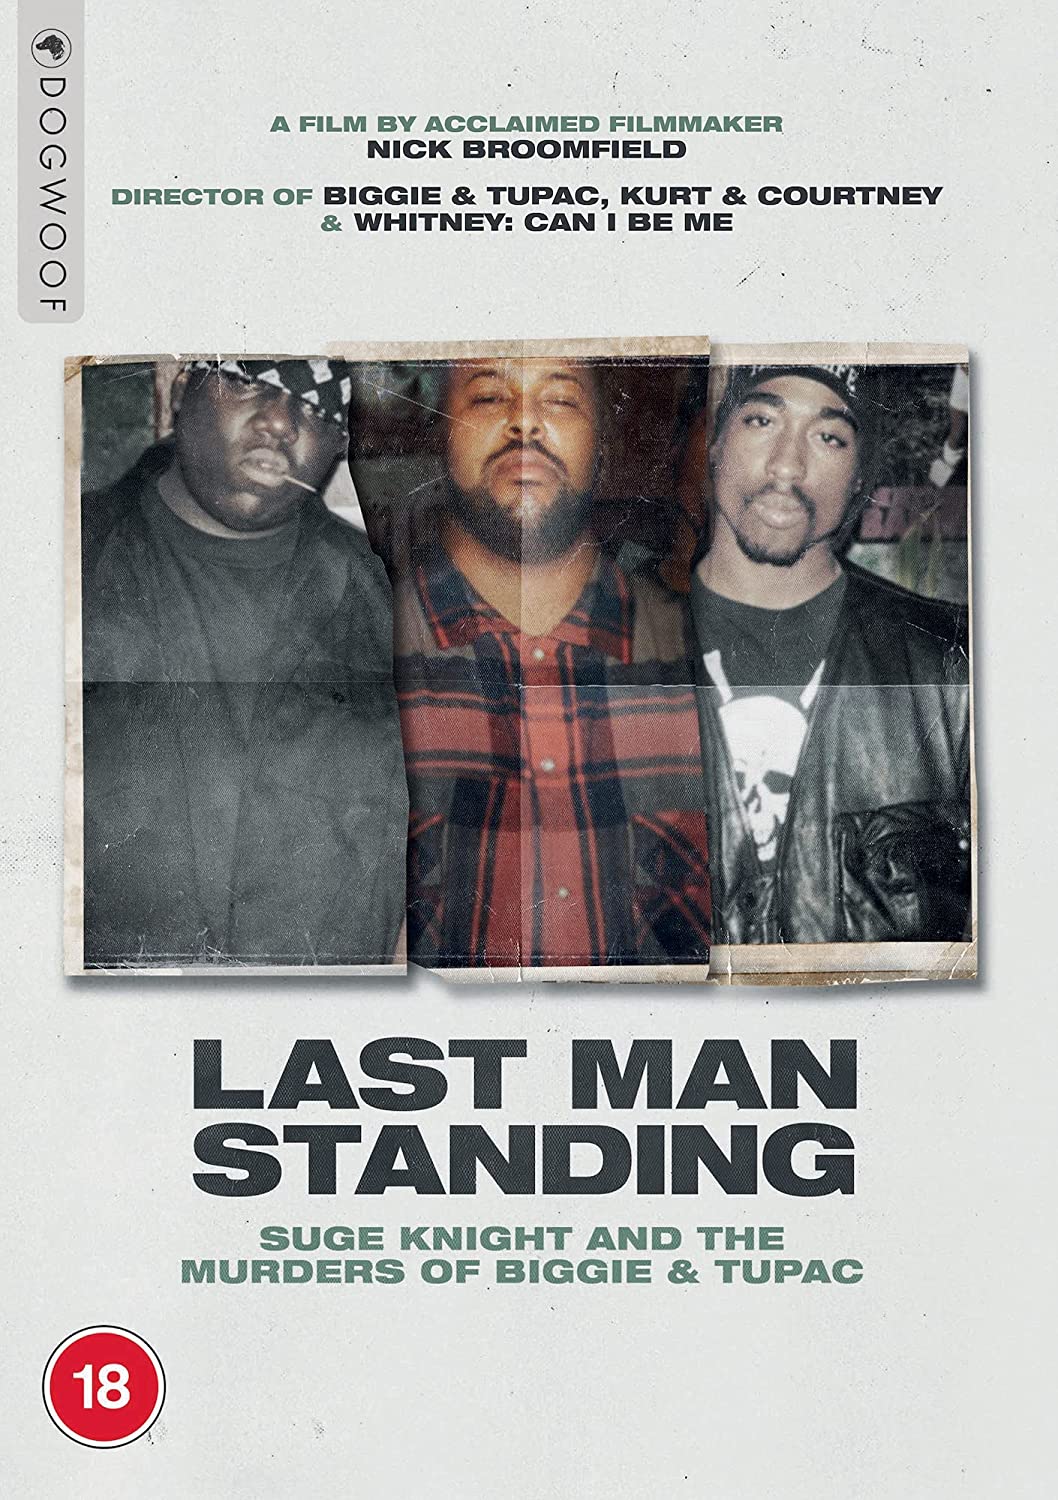 Last Man Standing: Suge Knight and the Murders of Biggie & Tupac - [DVD]